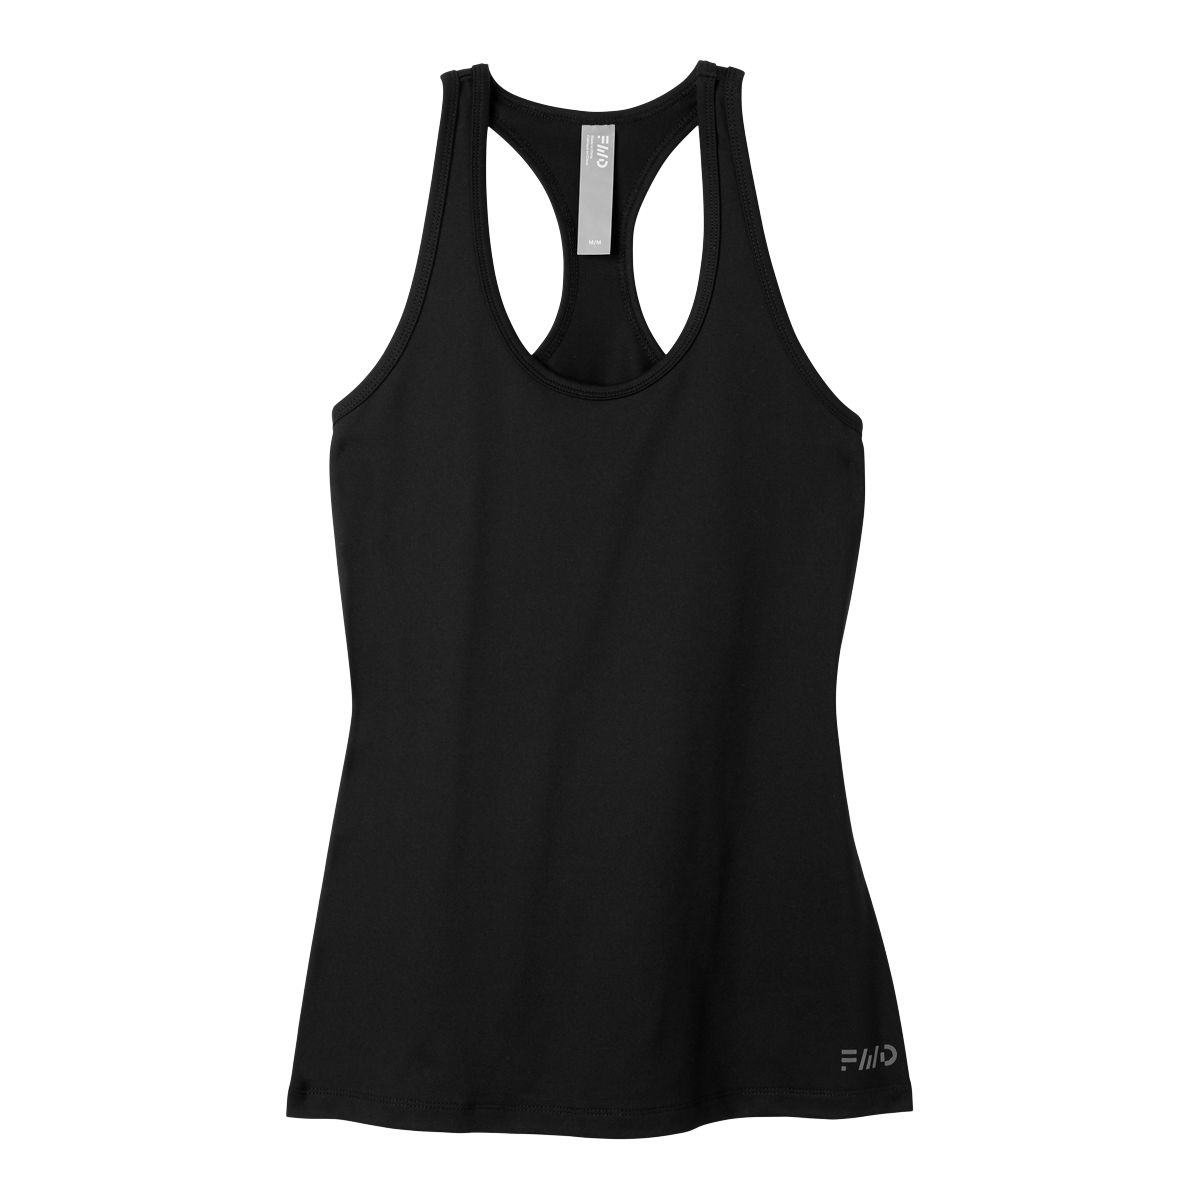 Fwd. Women's Racerback Tank Top  Fitted Fit Sleeveless Sports